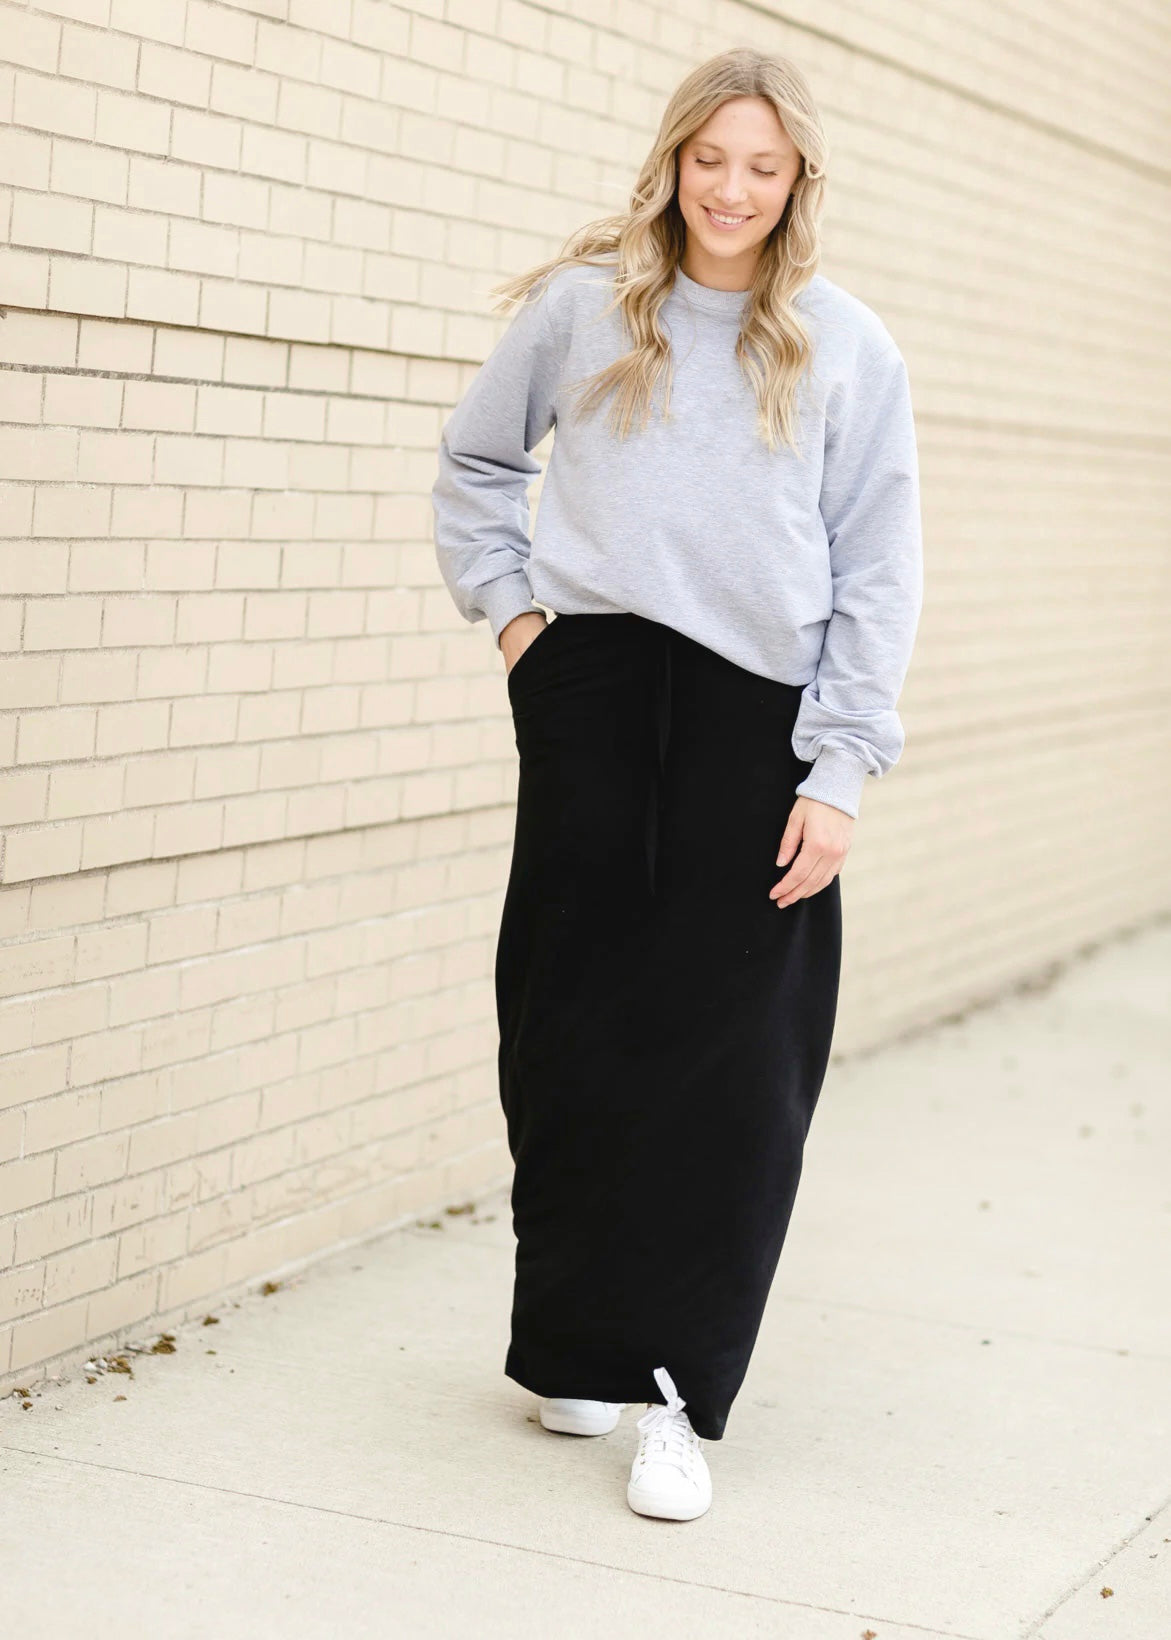 A young blonde woman with her hand in her pocket while smiling and wearing a sweatshirt and solid black Maxi Skirt with Pockets featuring a Soft & Stretchy Premium Fabric Blend, Adjustable Drawstring Tie Waist, and Pockets. Available in sizes S-3XL in both solid Black or Navy Blue. Discover our Best Selling All-year All-season Maxi Skirt for every body shape & size. 